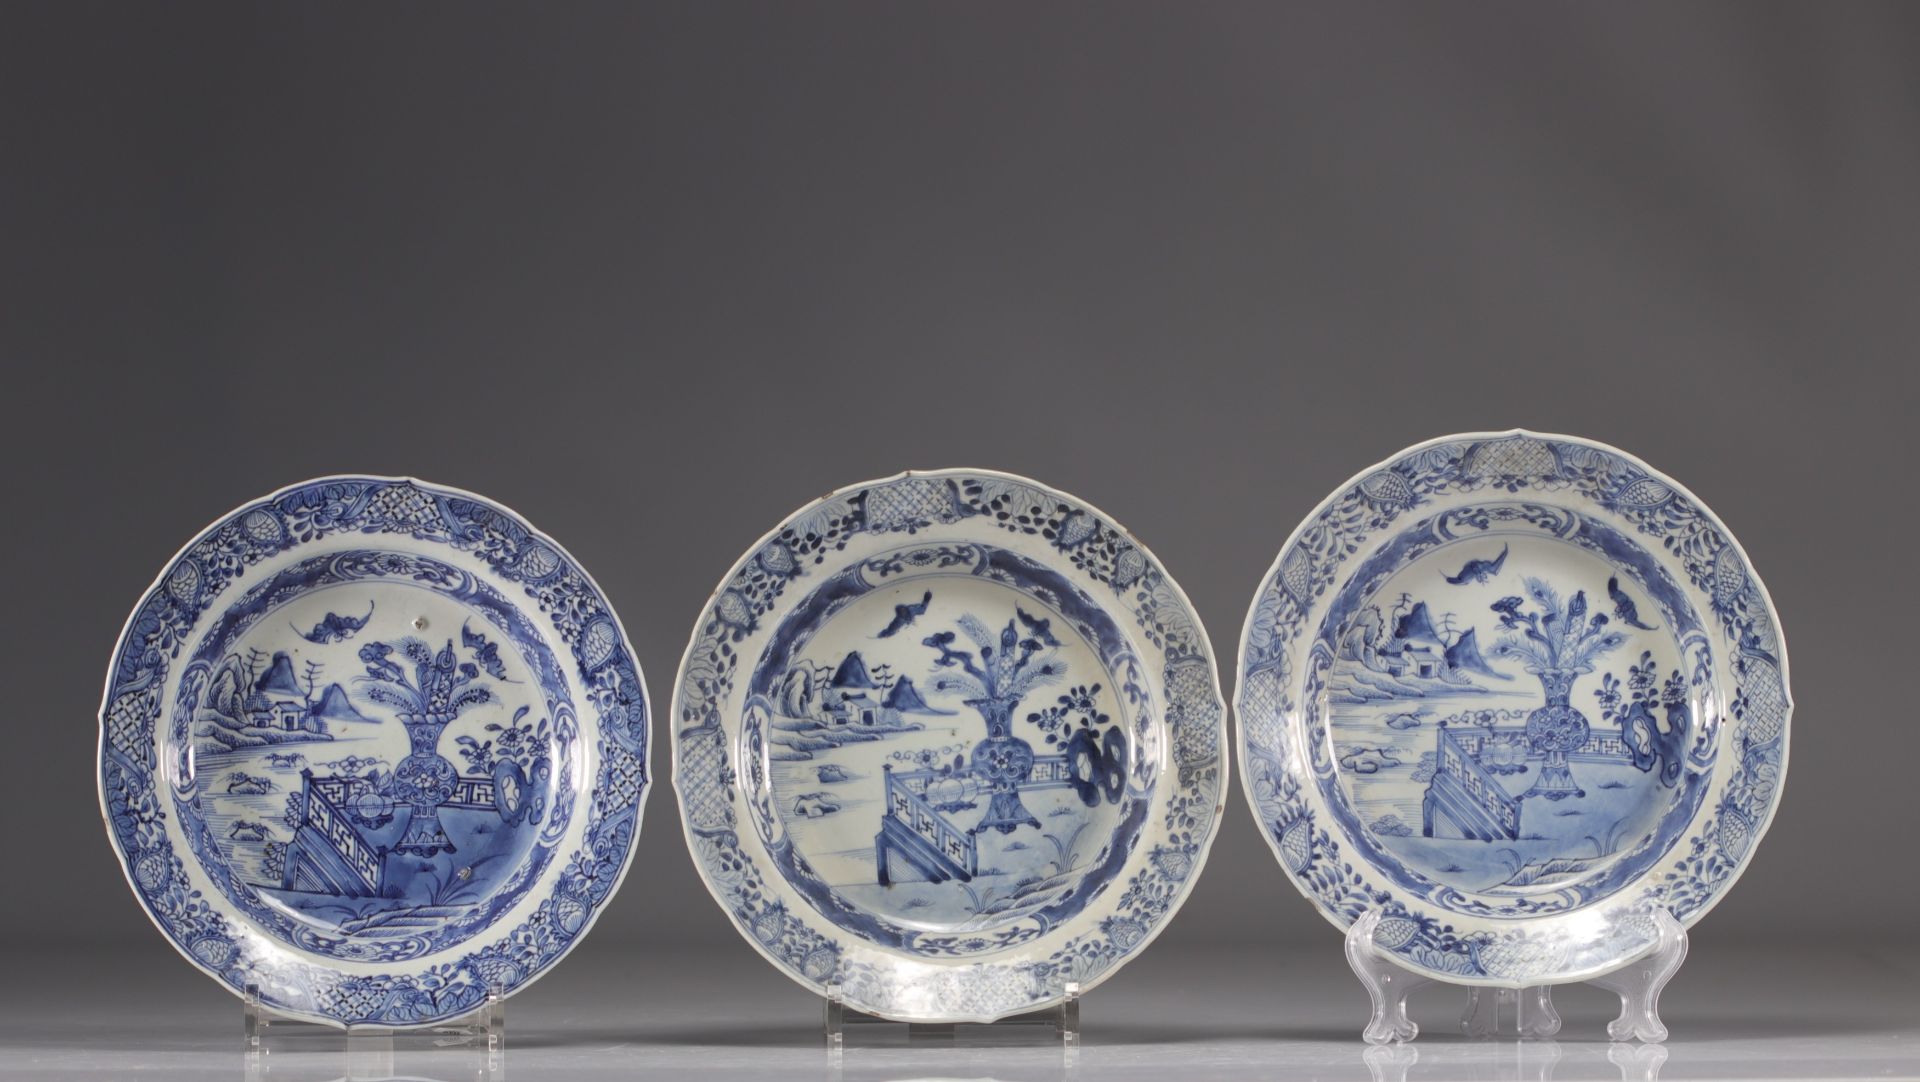 (3) Deep plates in white and blue porcelain decorated with flowering vases from China from the 18th